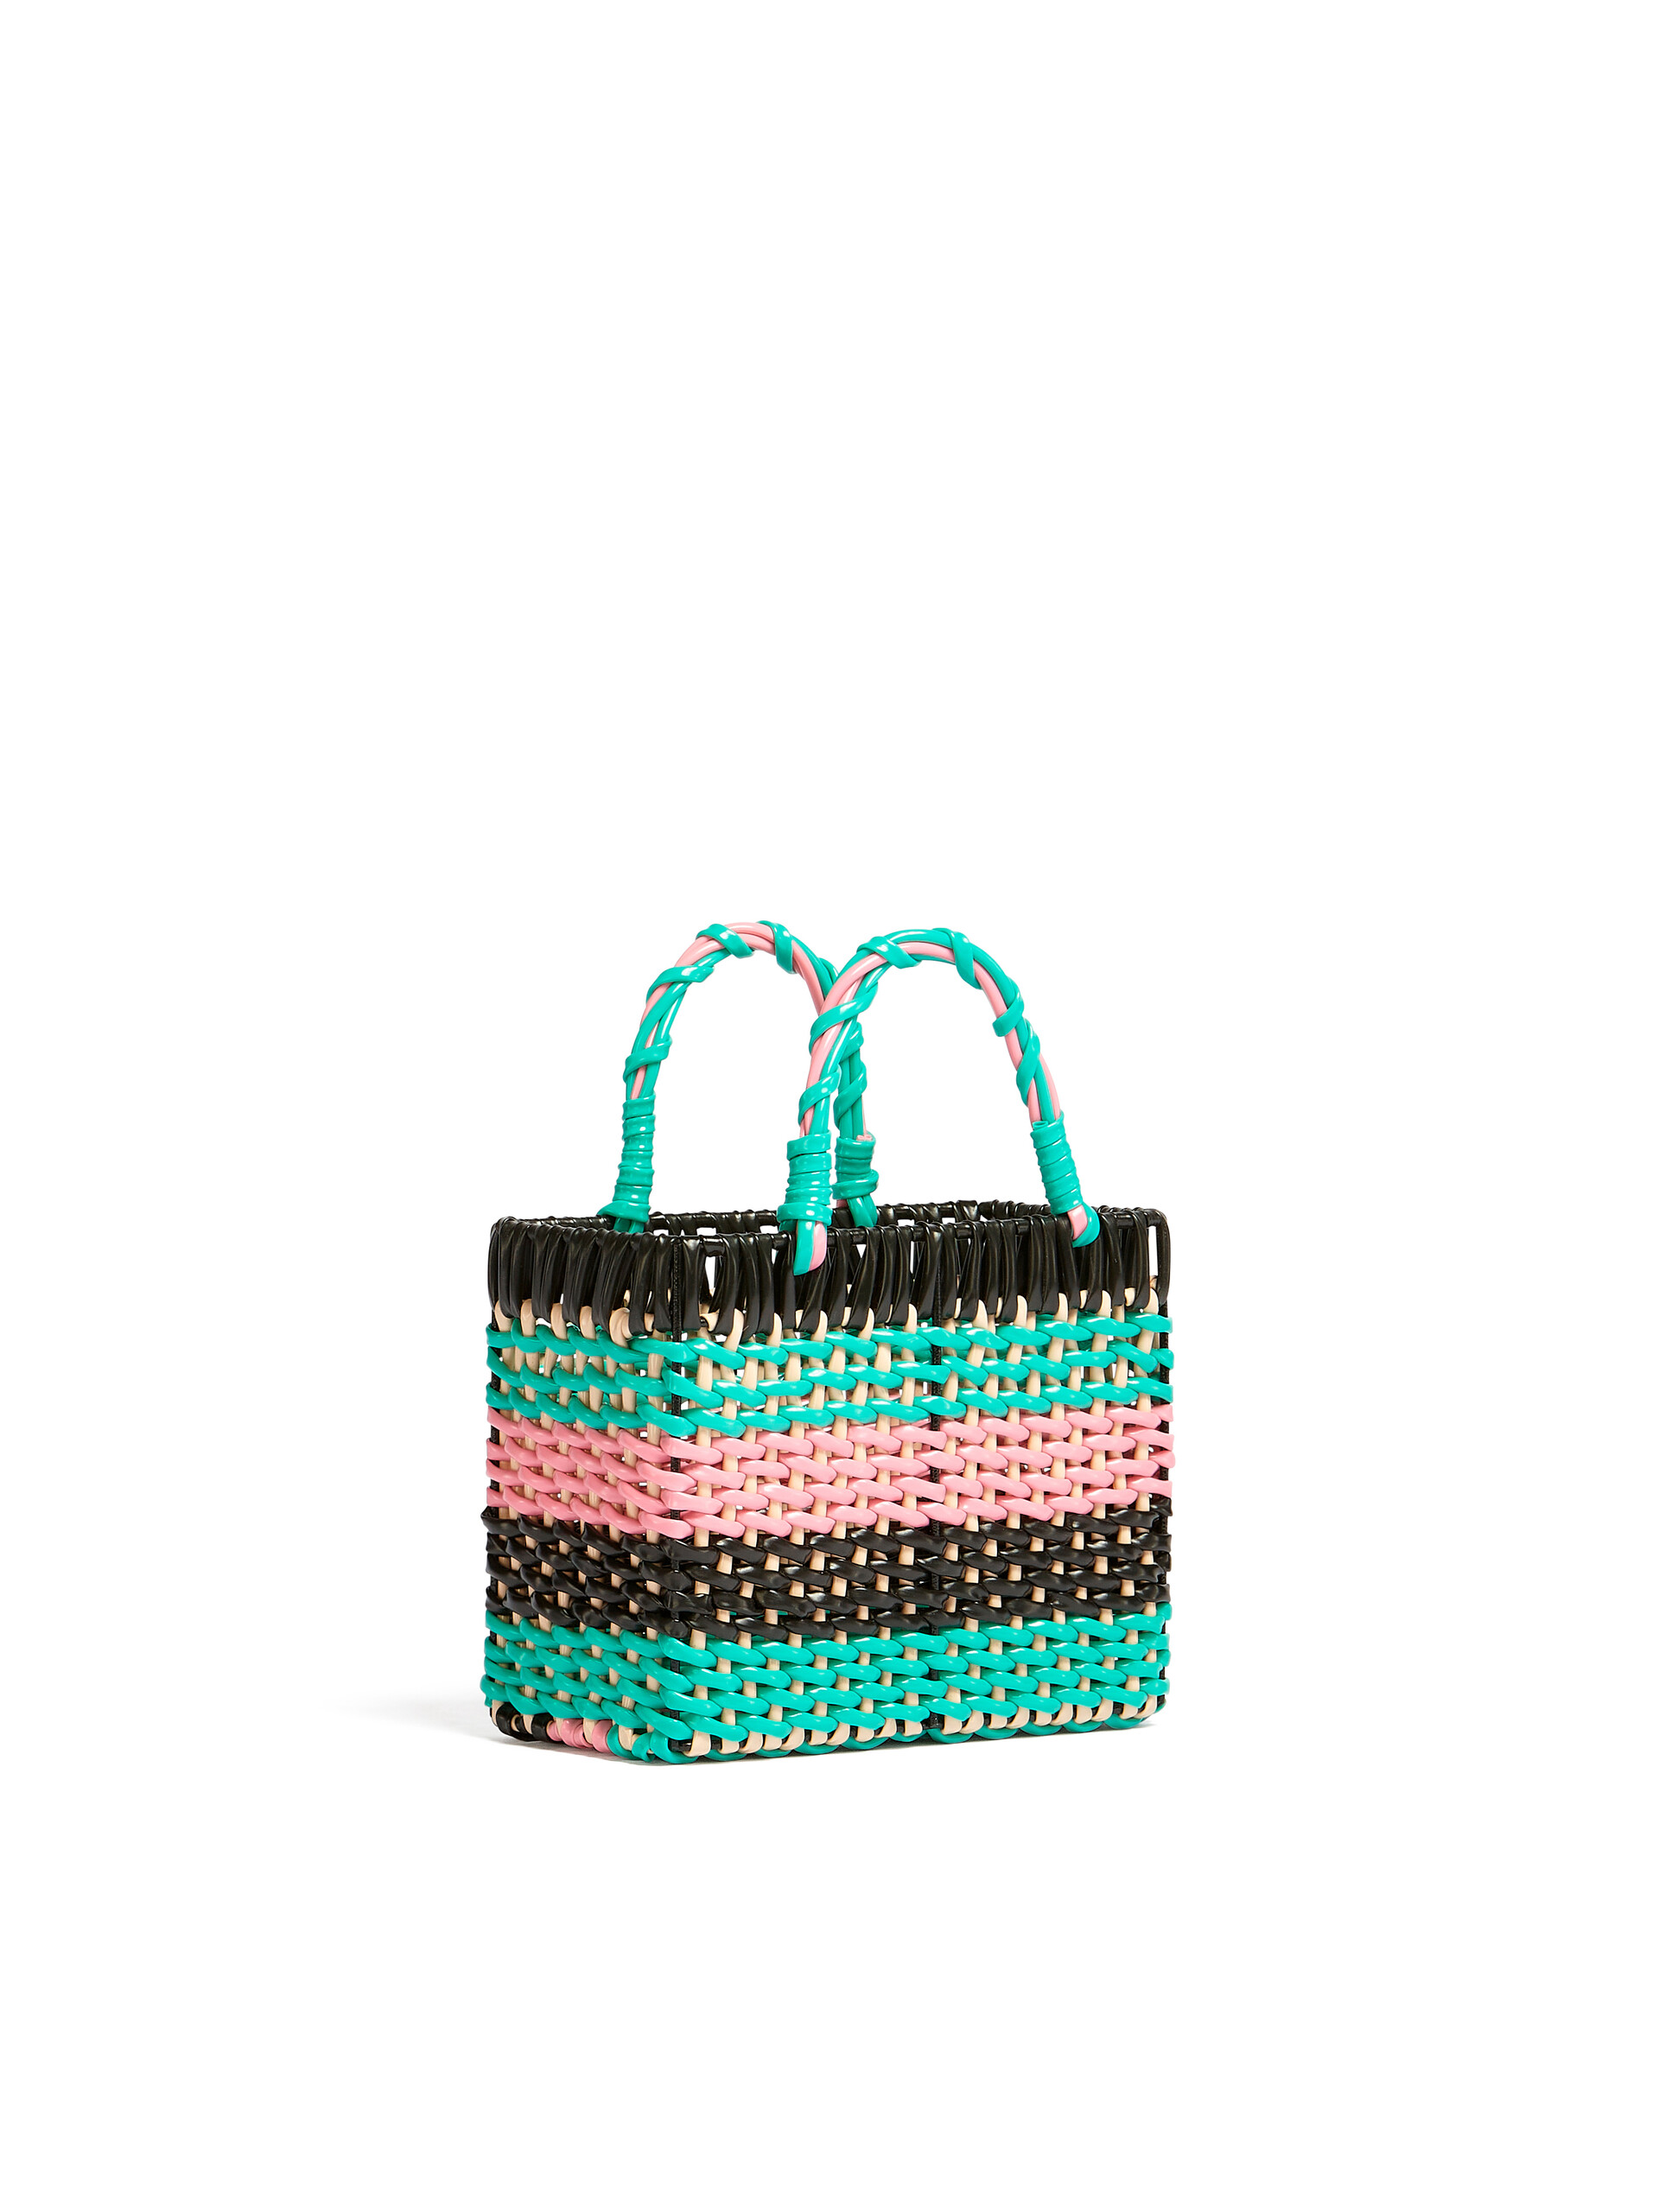 MARNI MARKET basket in iron and green pink and brown PVC - Home Accessories - Image 2